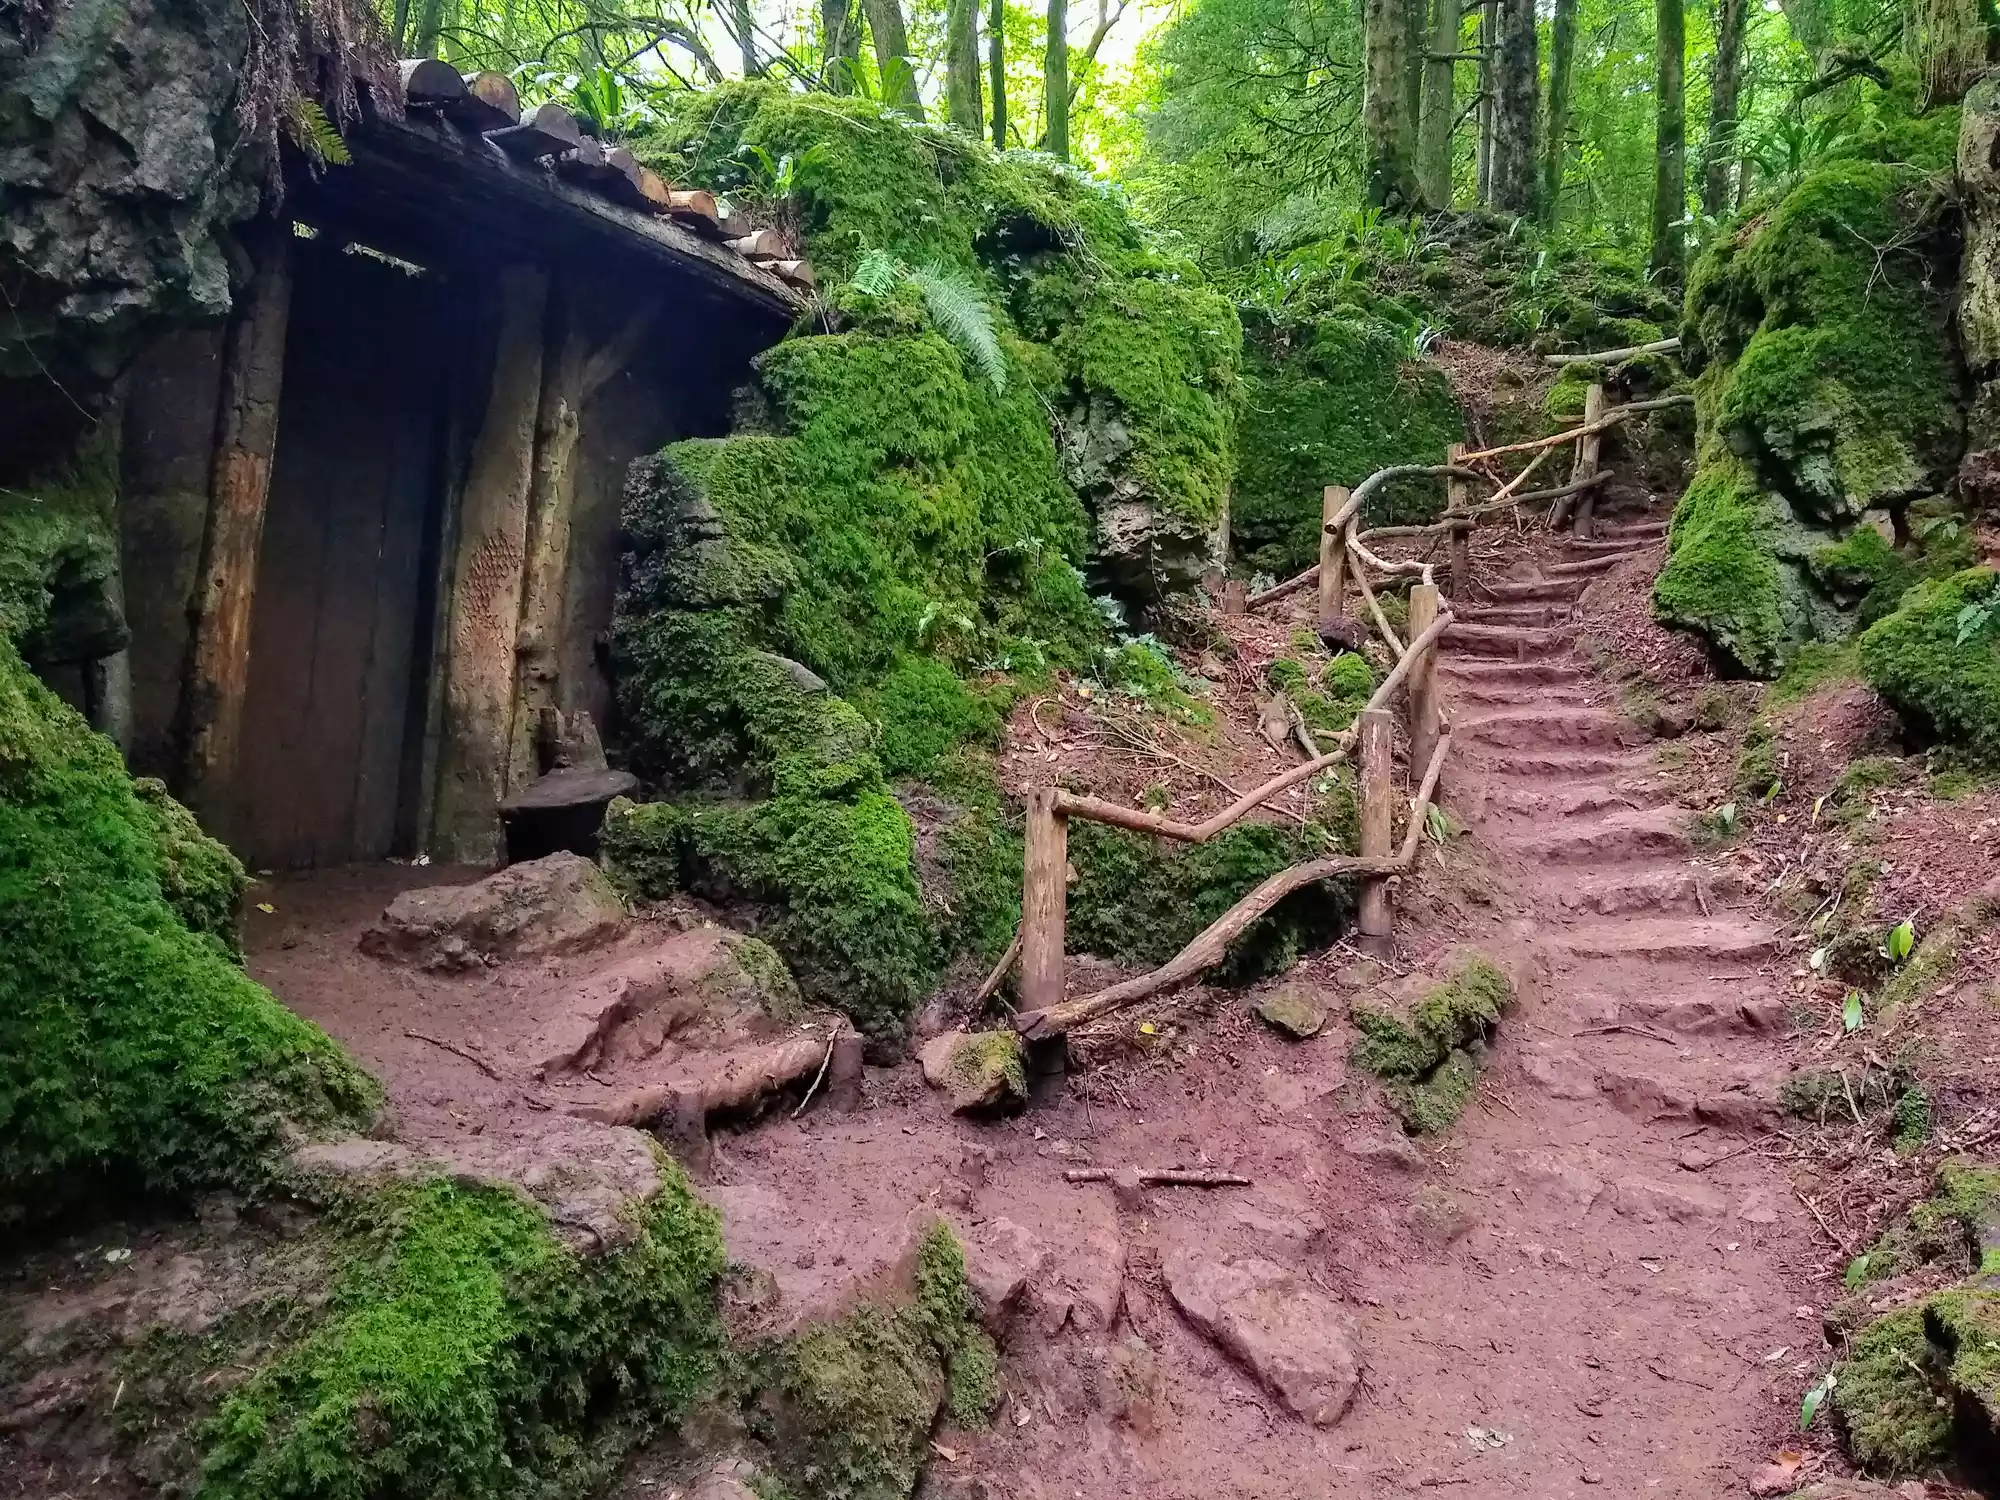 A wooden shack and stone staircase in a green forest 